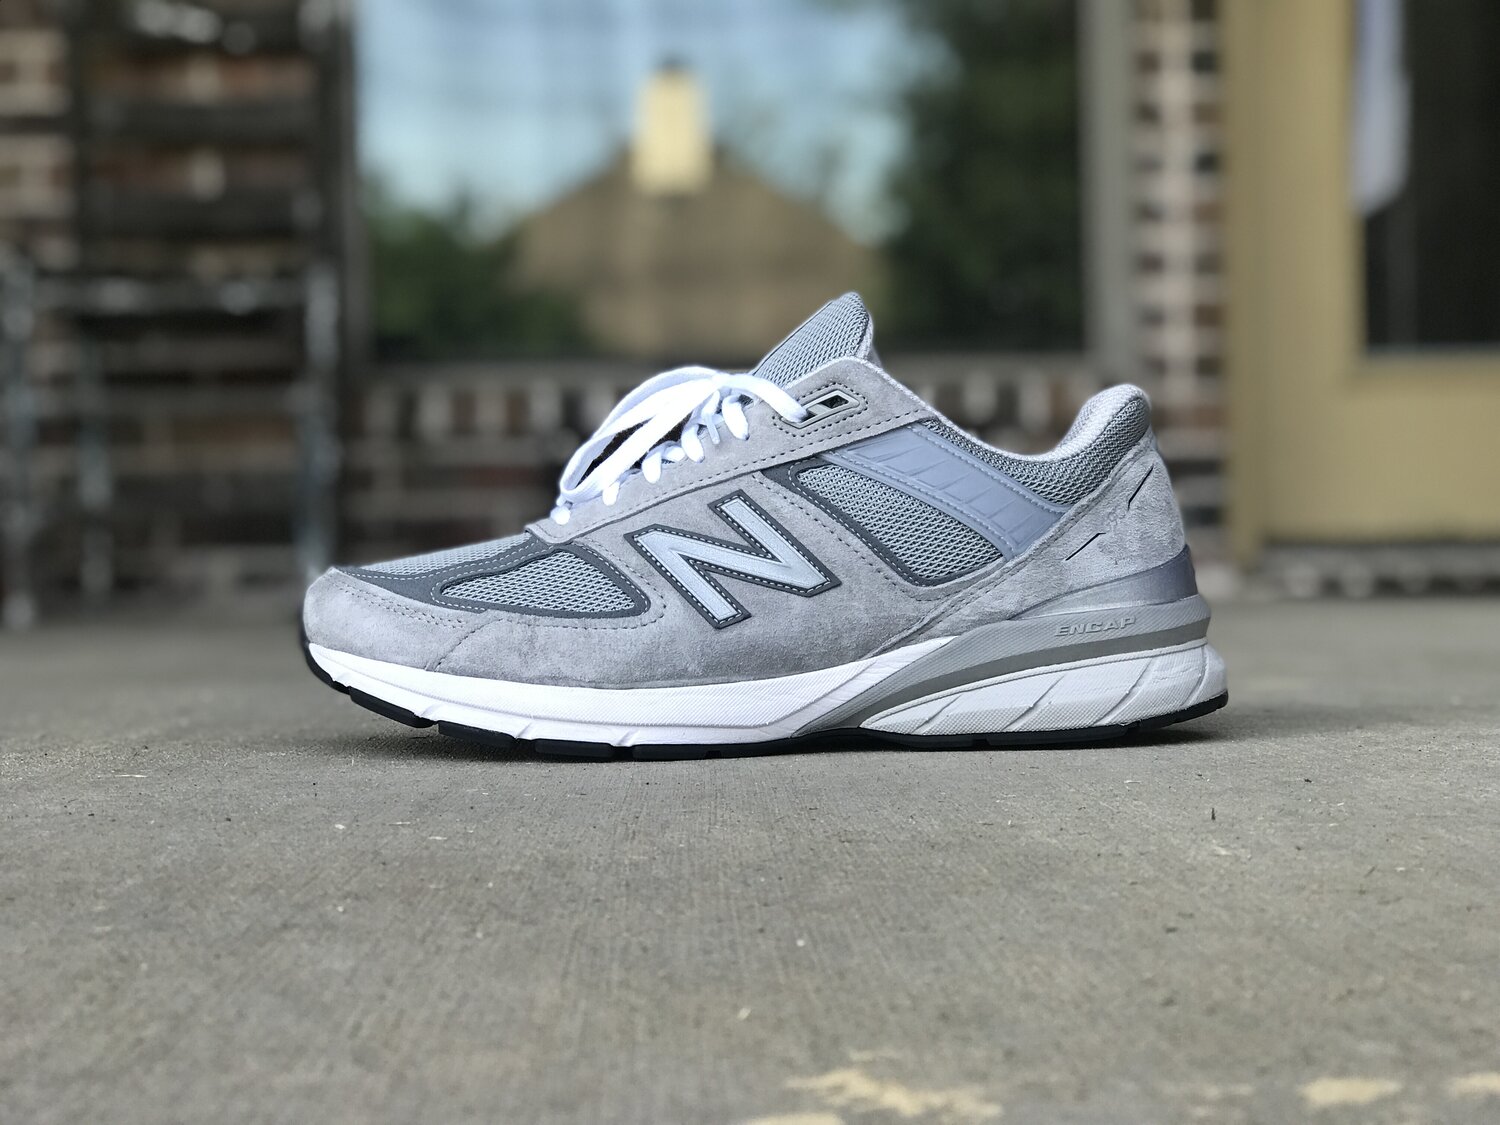 medley In the name inject Unboxing The New Balance 990v5 "Classic Grey" | [Video] | The Retro Insider